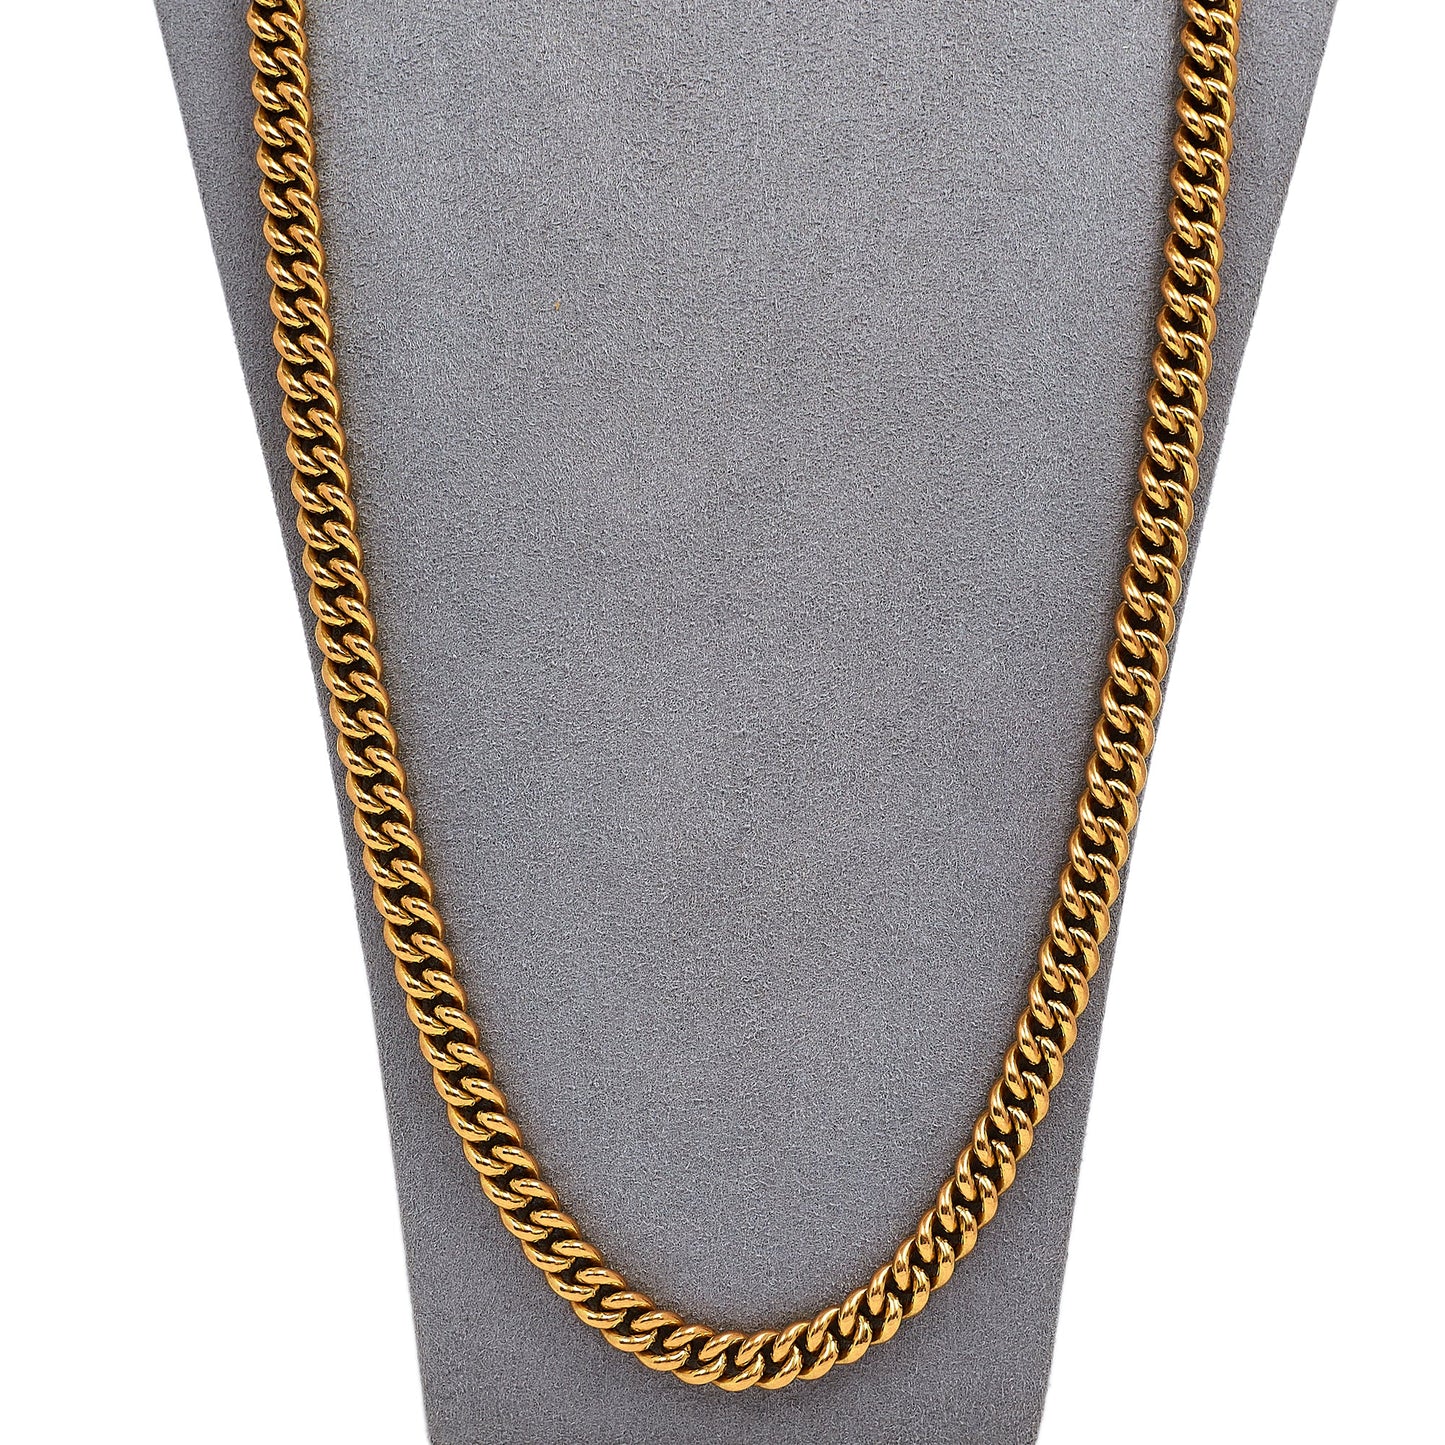 Pre-Owned 22ct Yellow Gold Curb Chain Necklace